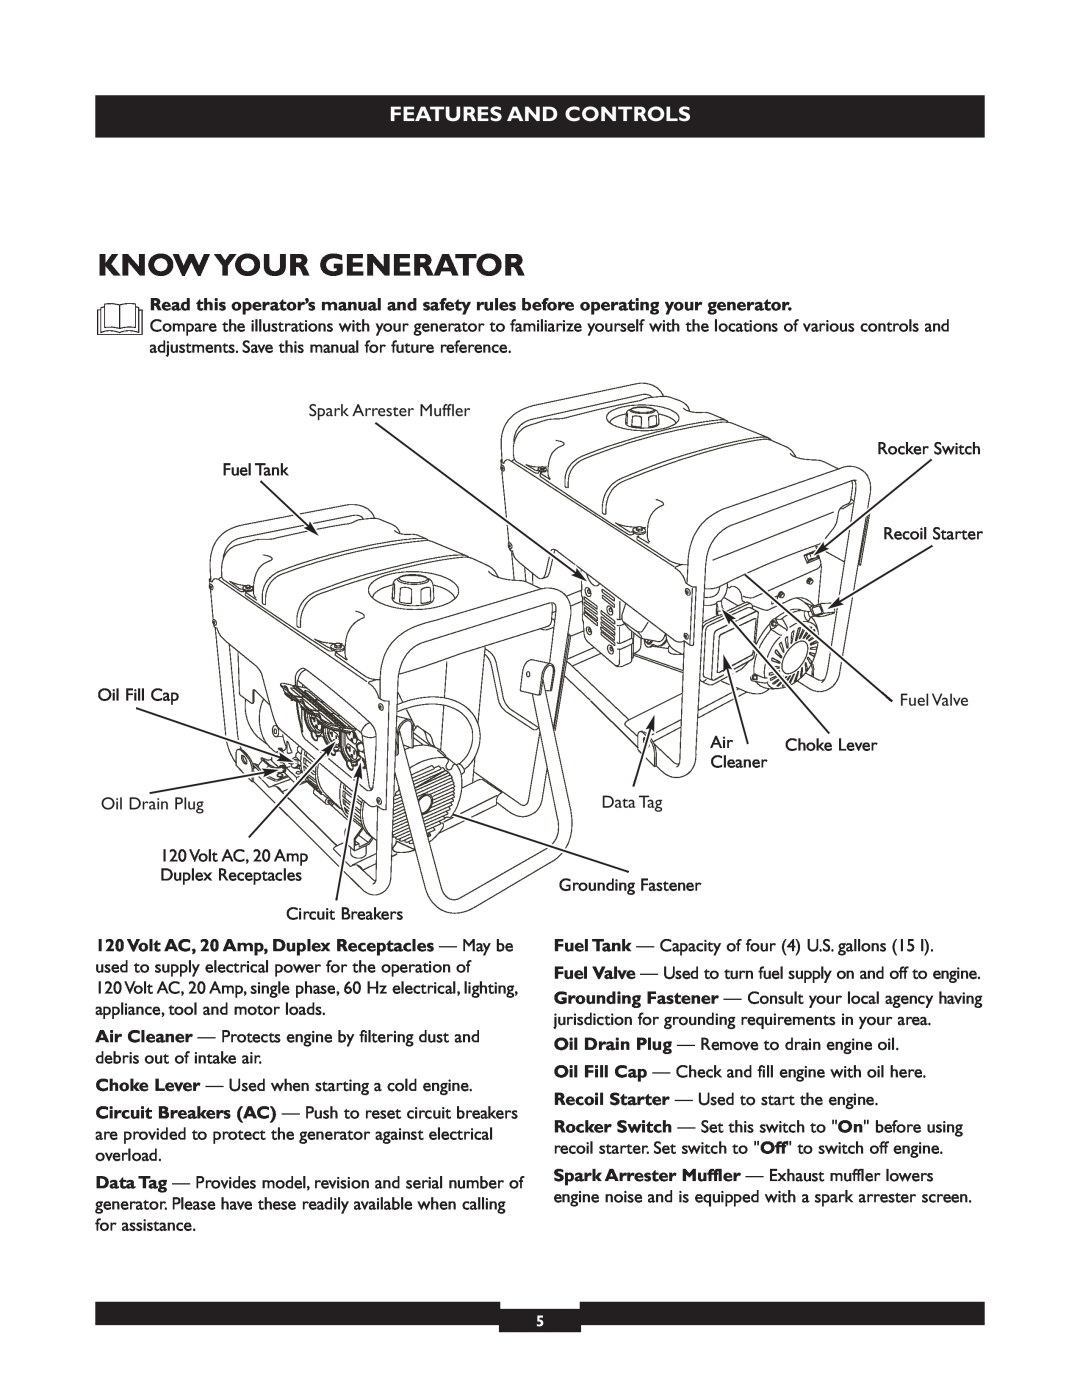 Briggs & Stratton 30219 manual Know Your Generator, Features And Controls 